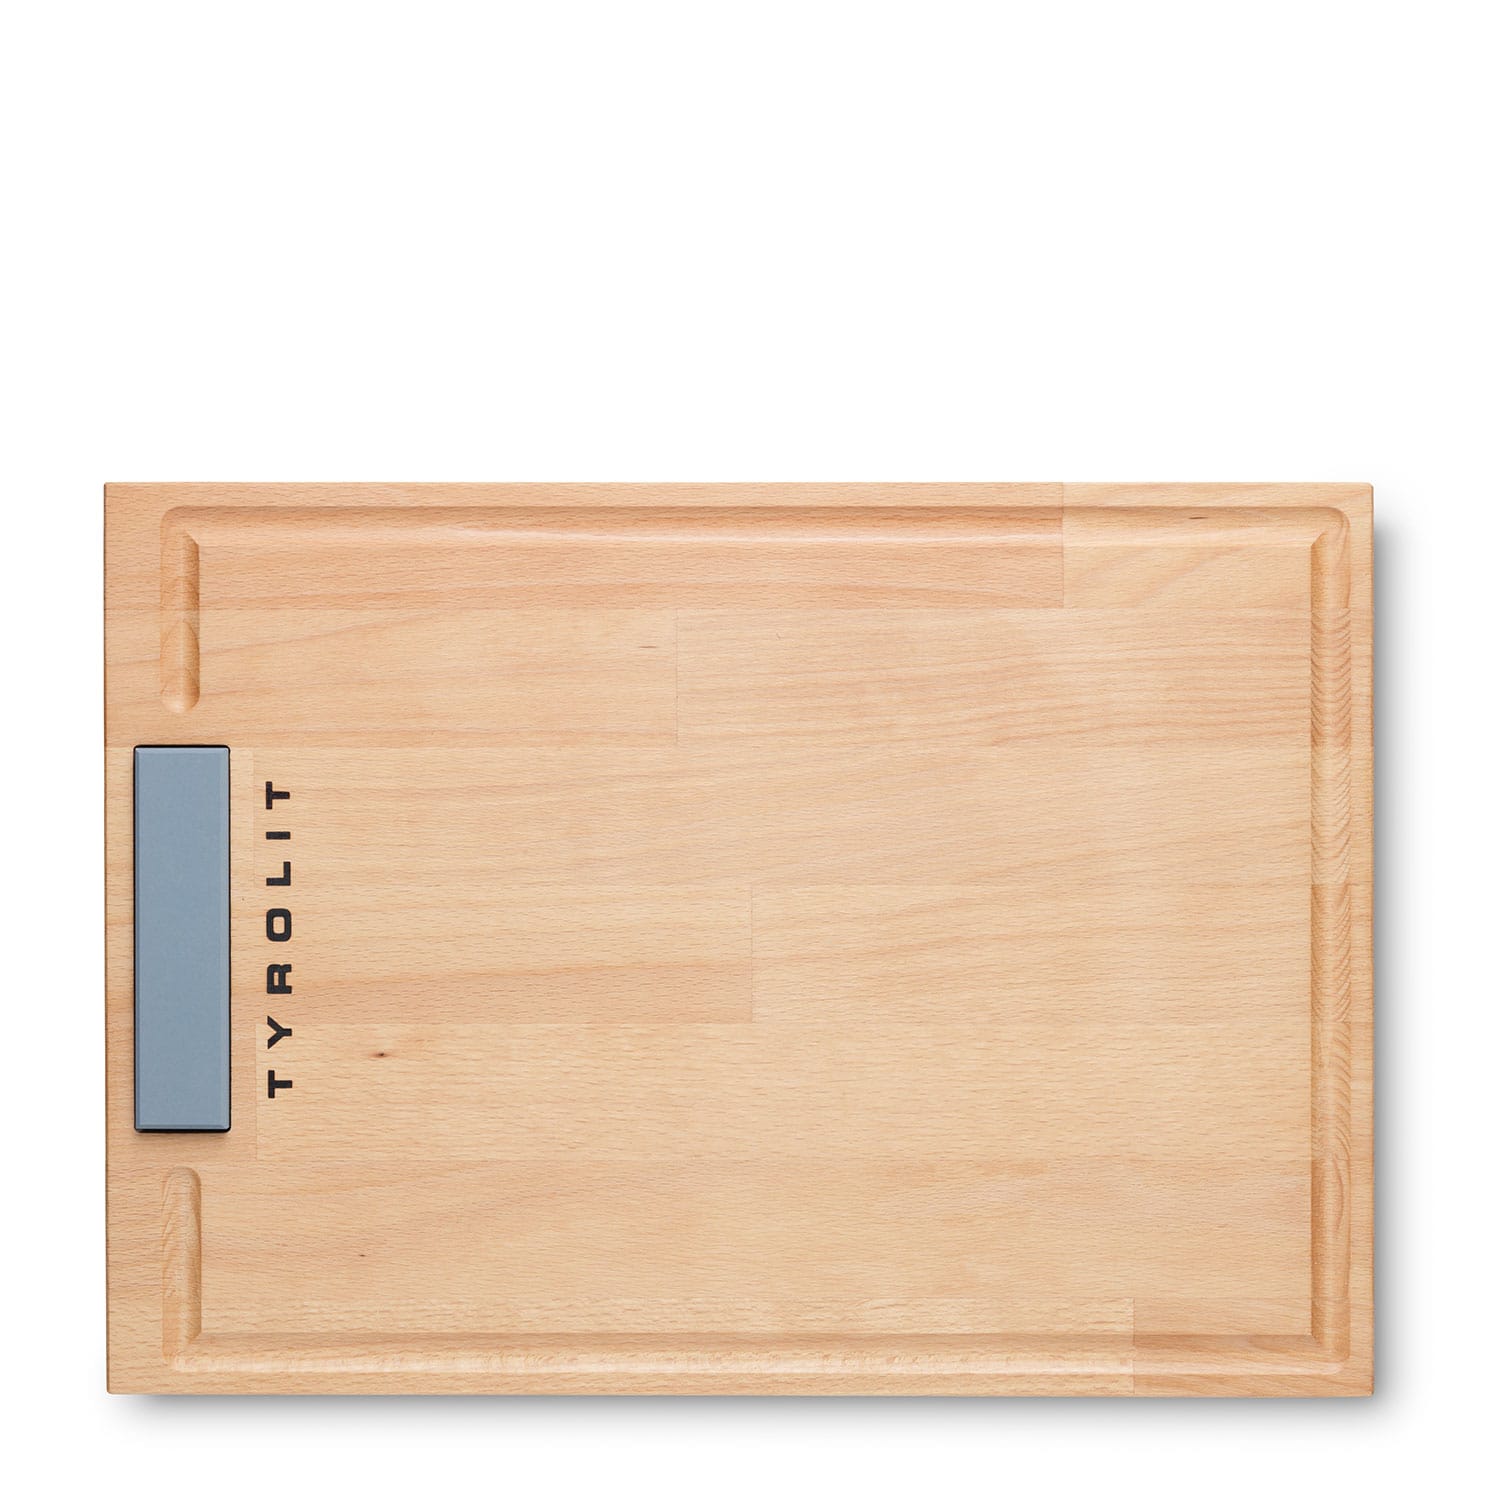 TYROLIT life Cutting Board Plus with sharpening stone